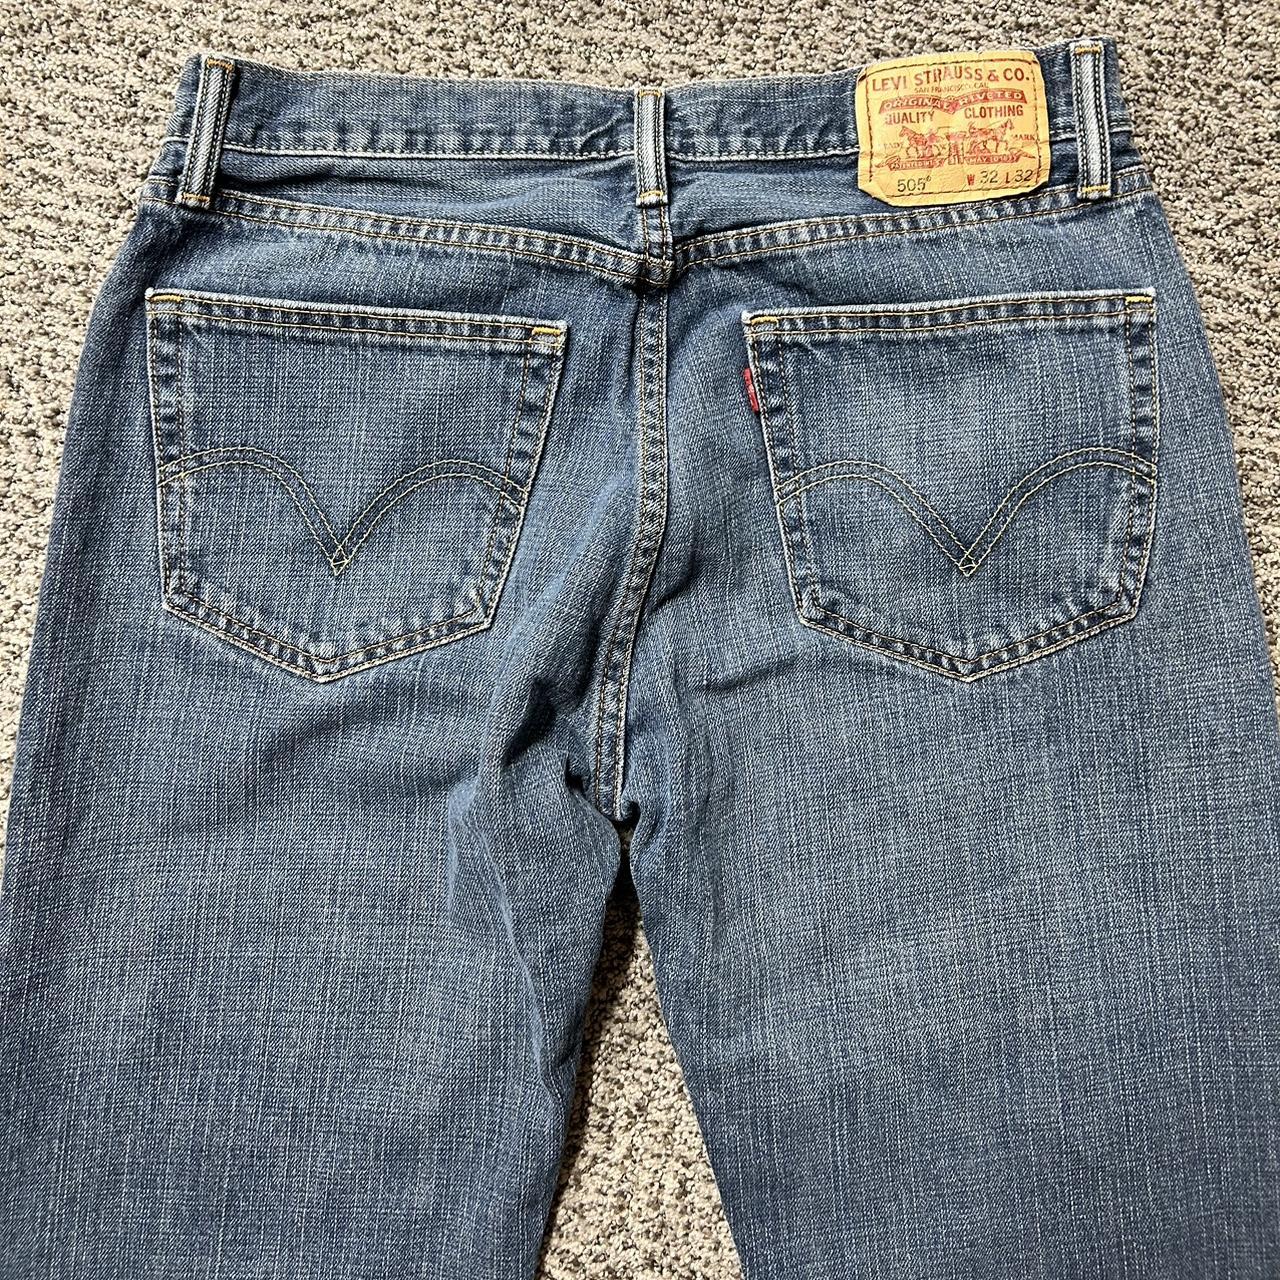 Levi's Men's Navy and Blue Jeans (3)